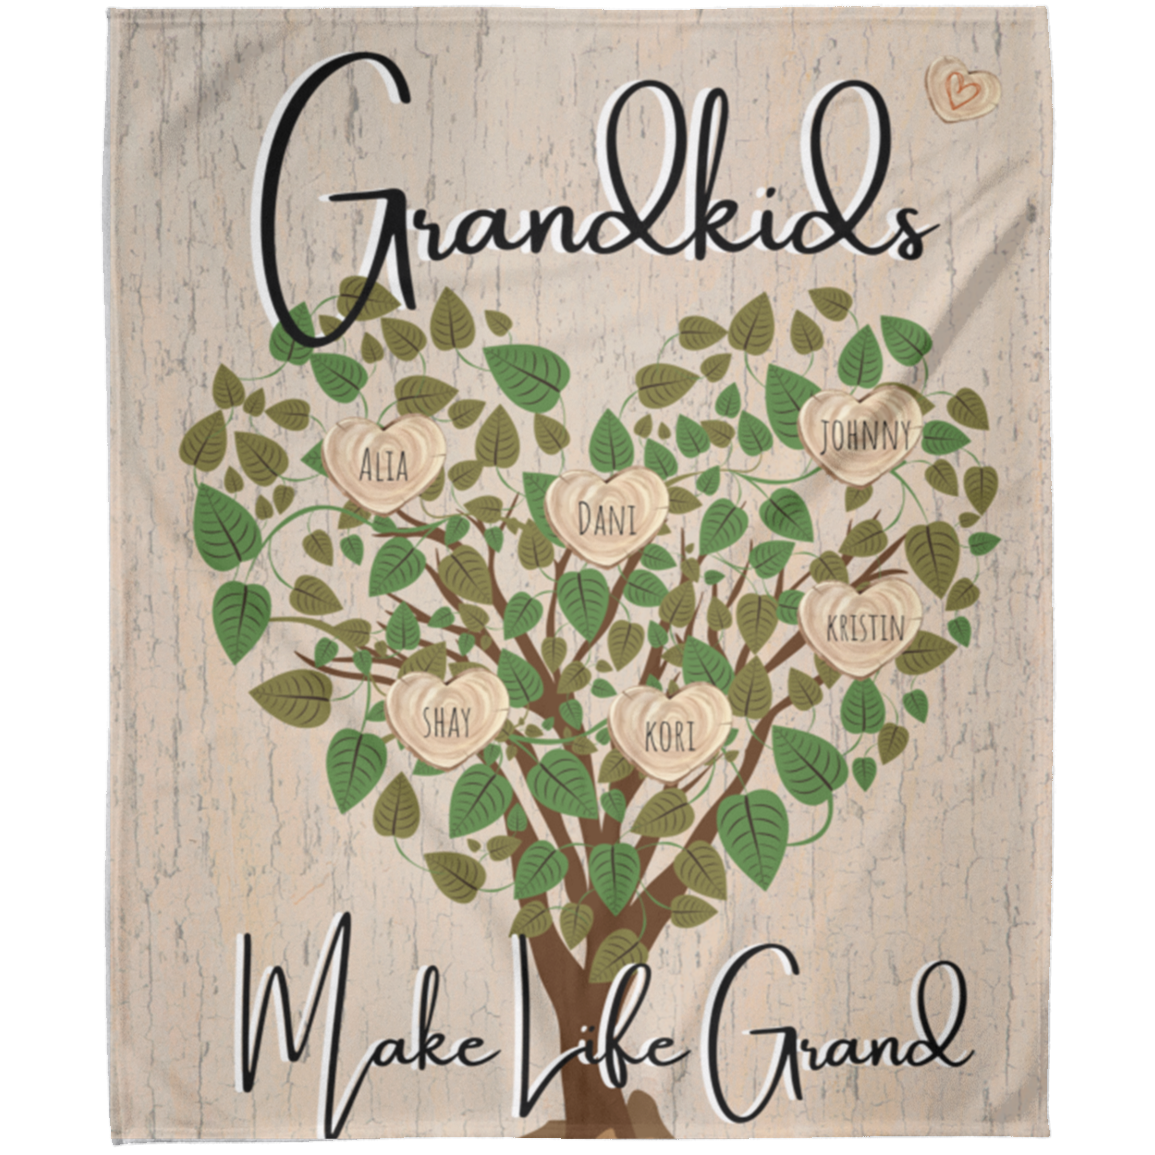 Grandkids Make Life Grand Blanket, Customize with up to 20 names!